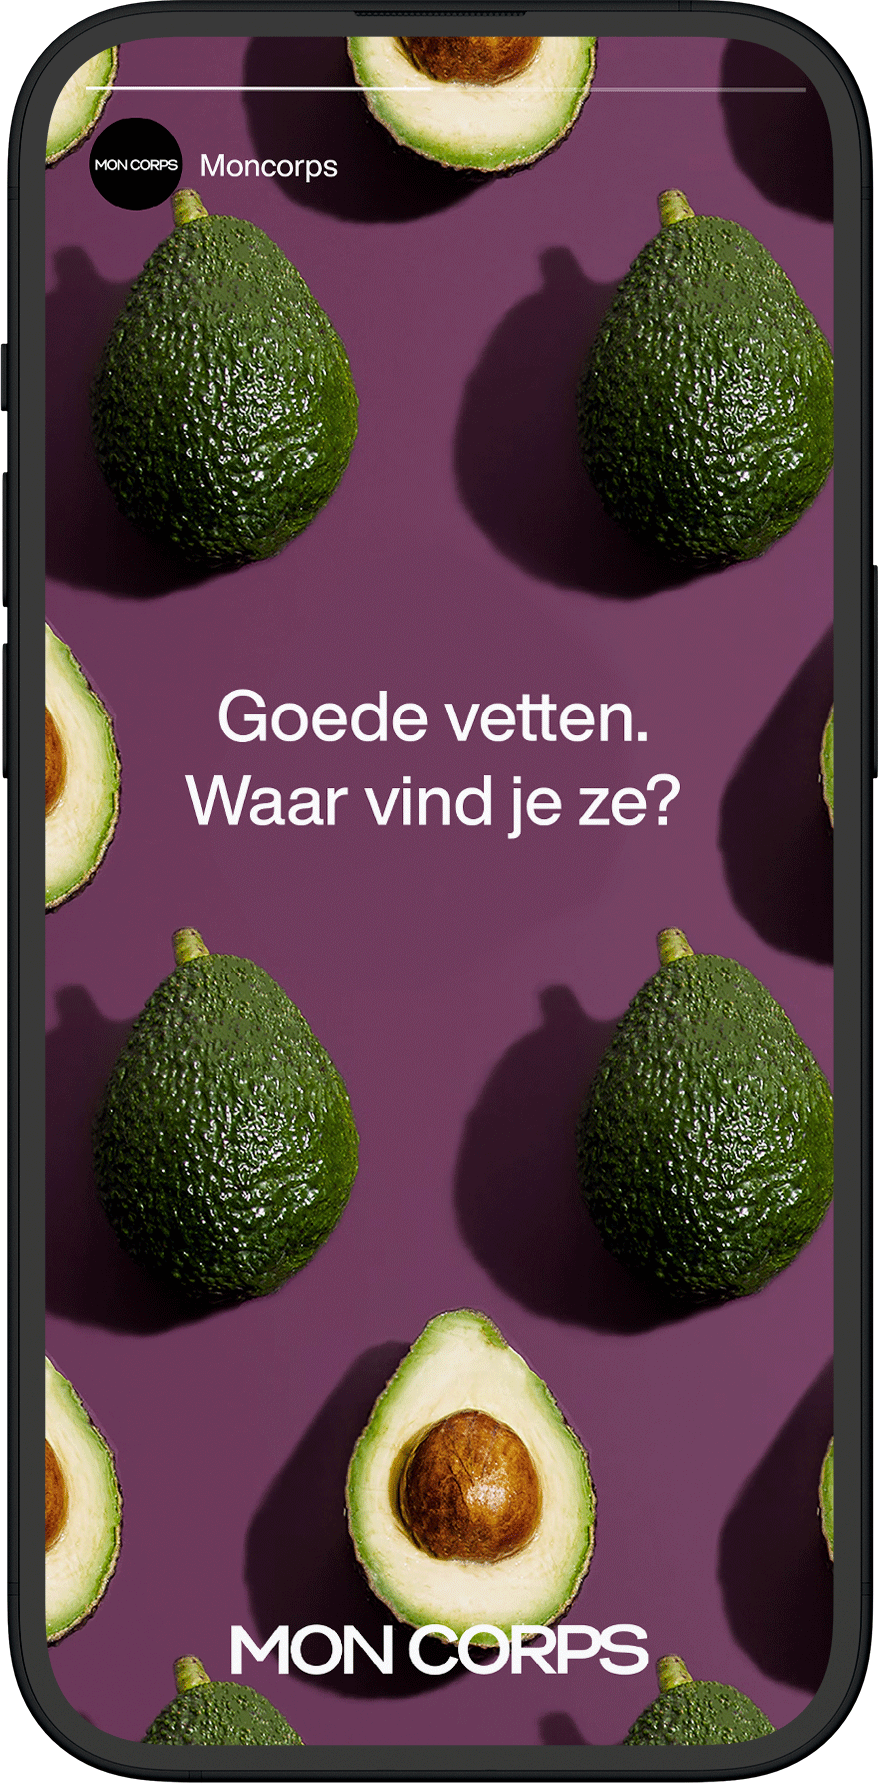 iPhone screen with an avocado ad for social media content